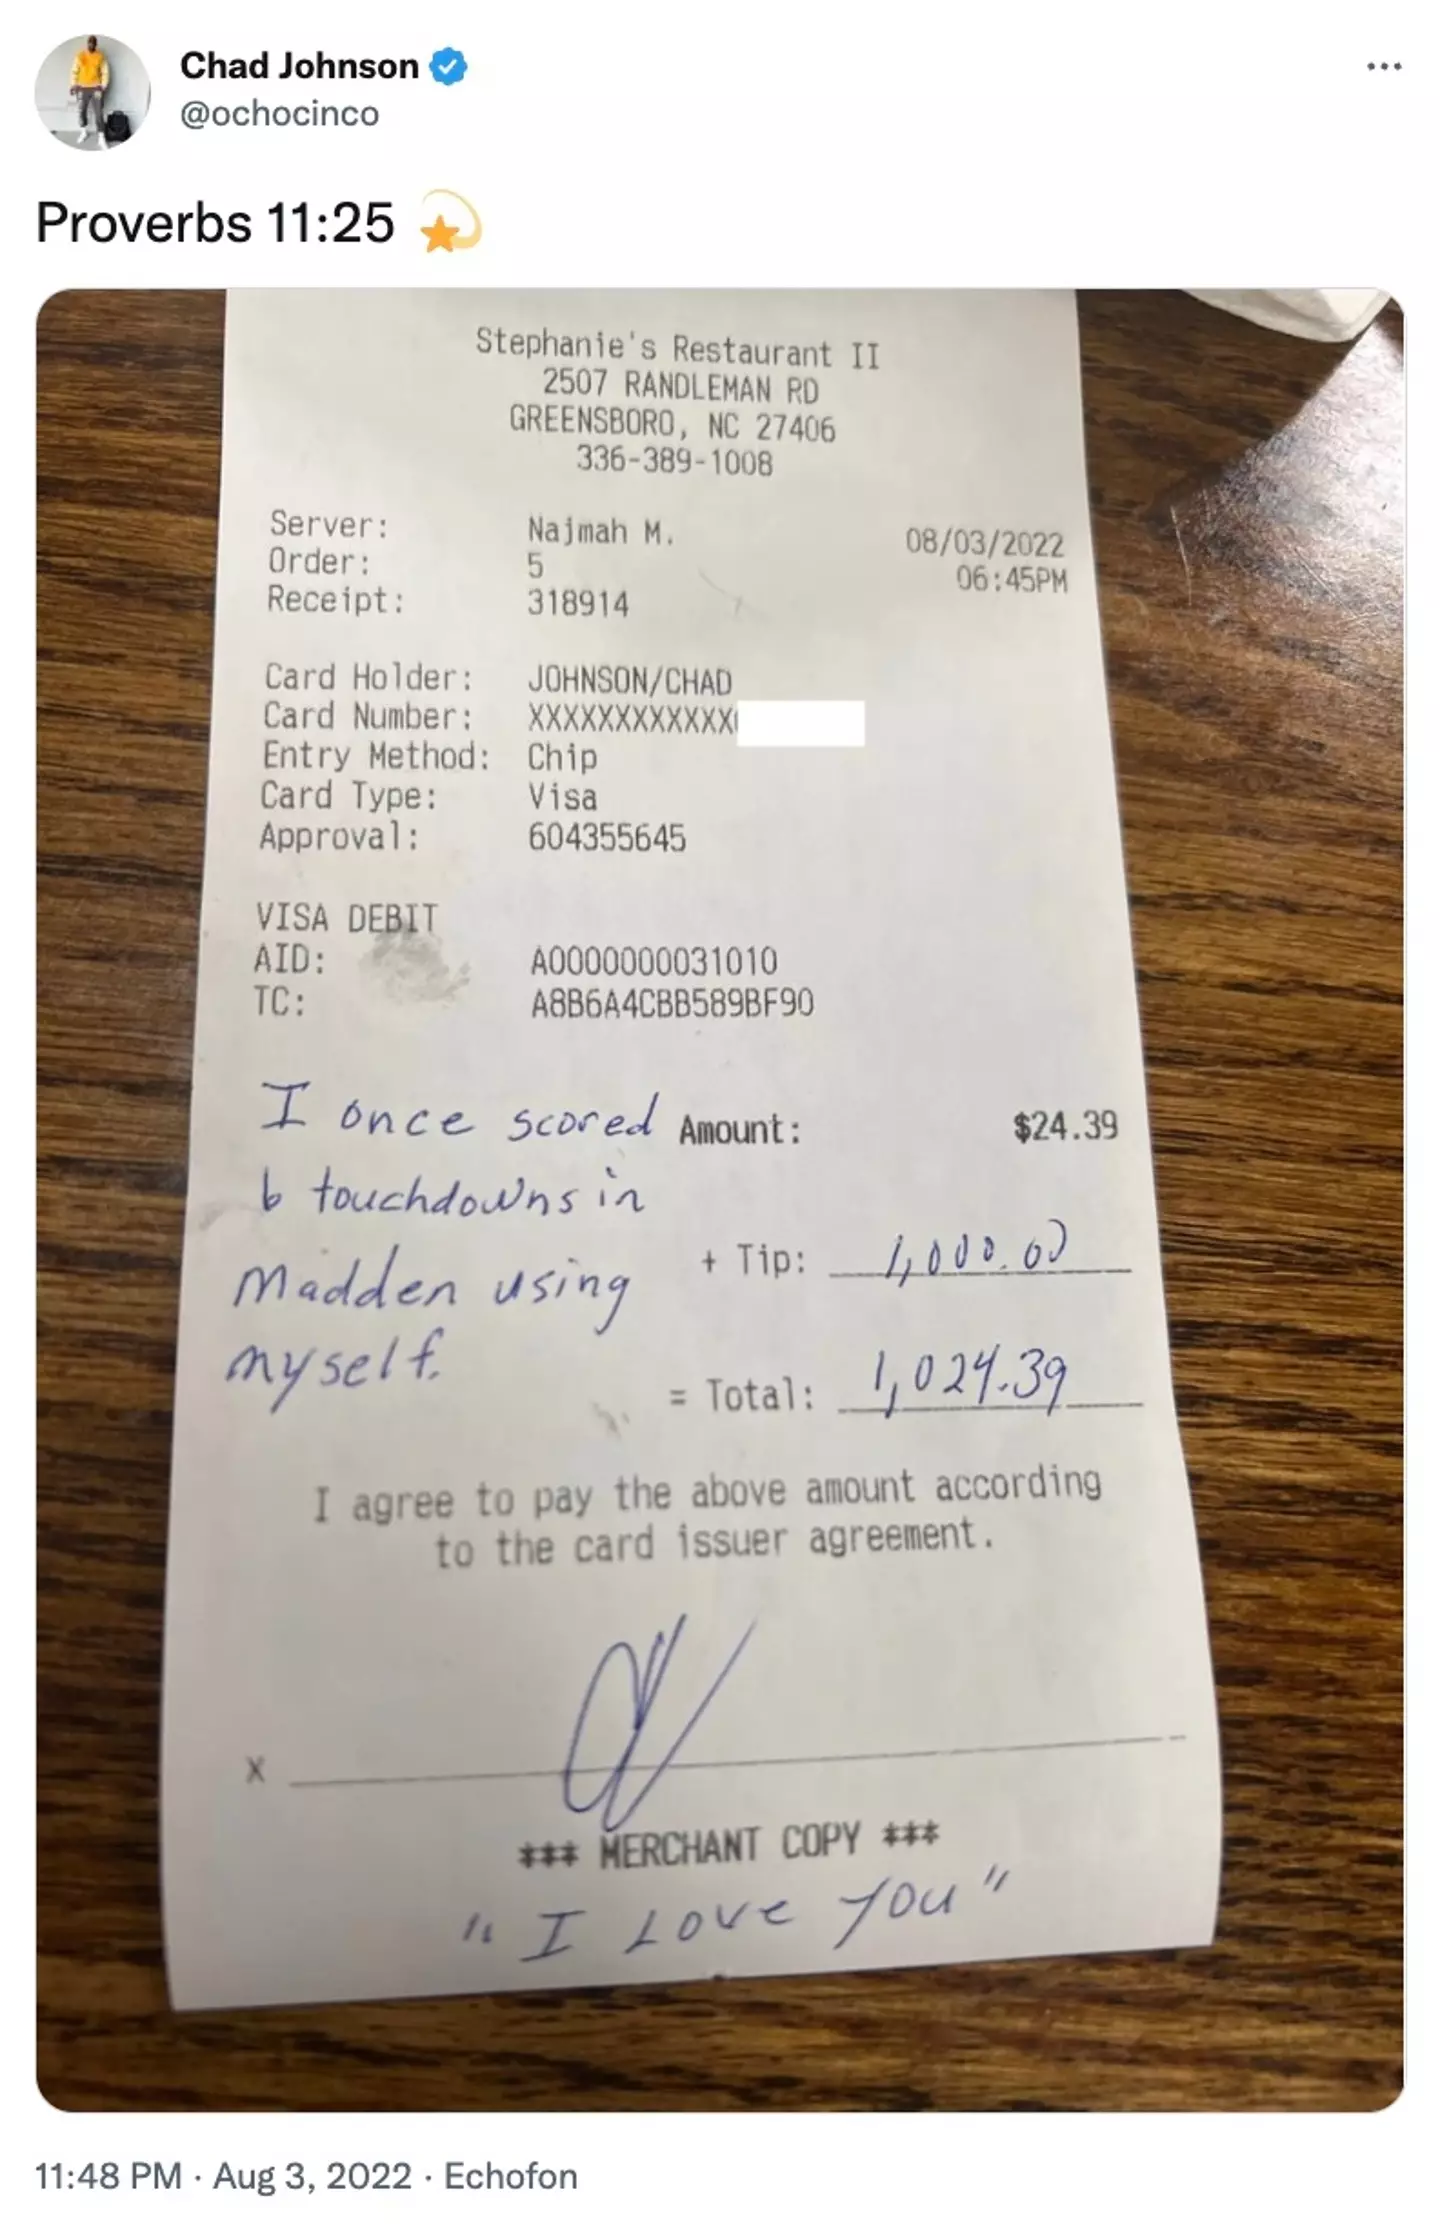 This isn't the first time Johnson's left a generous tip.